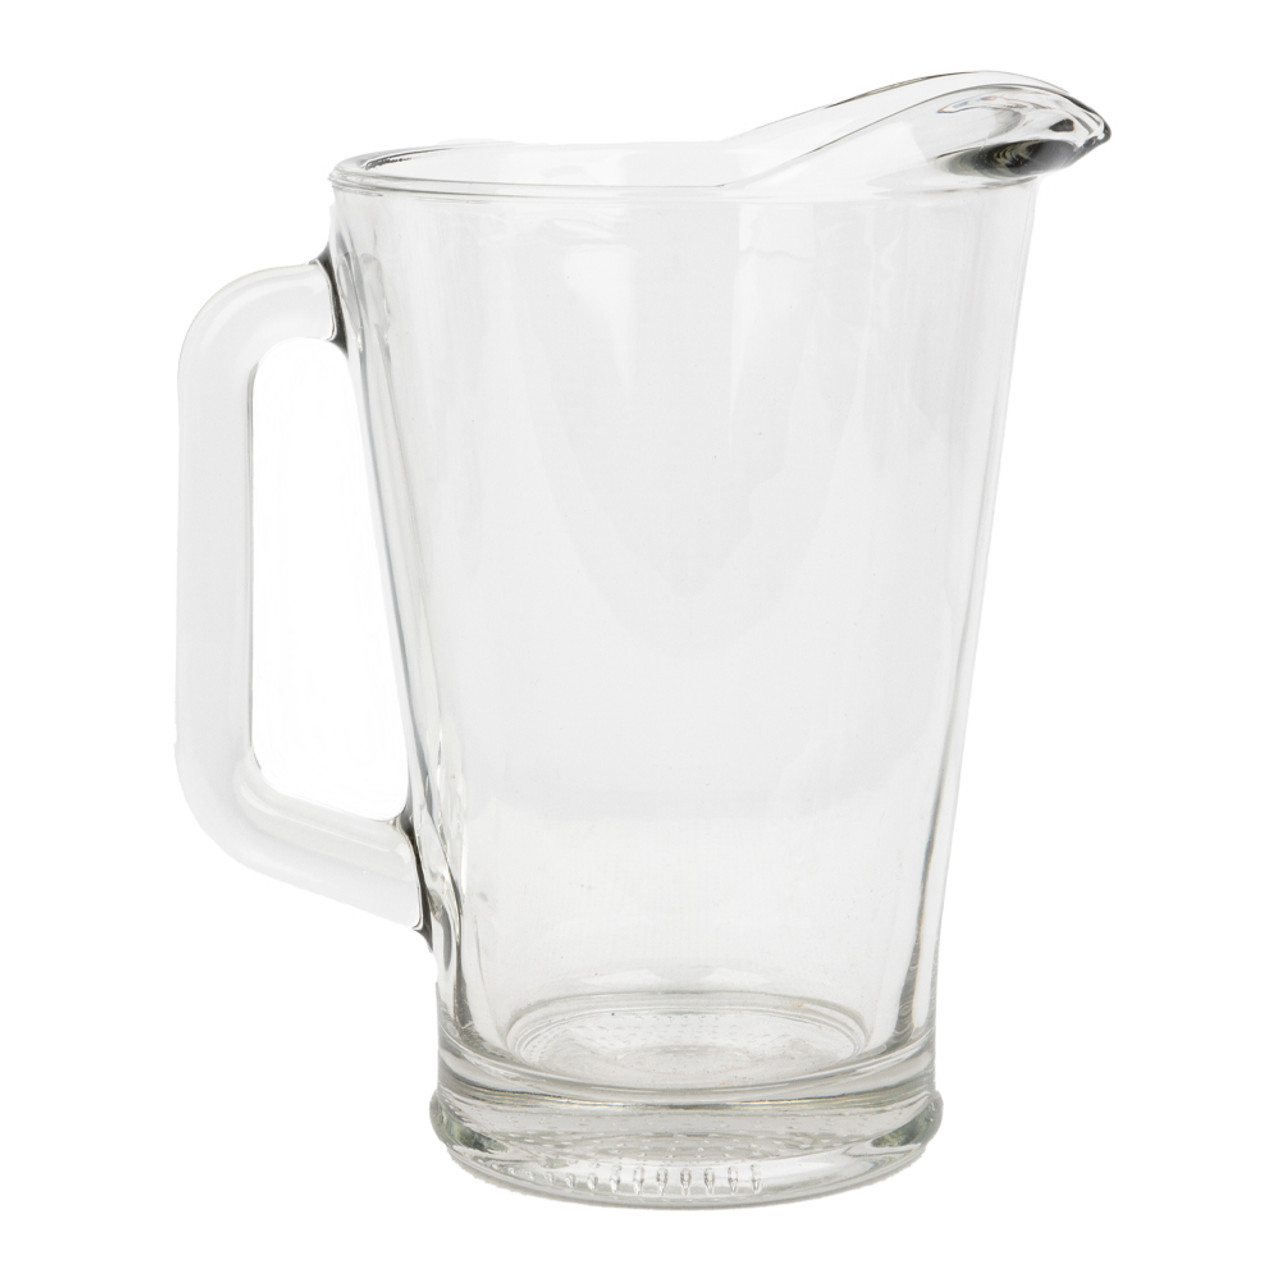 Clear 60oz Glass Pitcher - The Warehouse at C.C. Creations